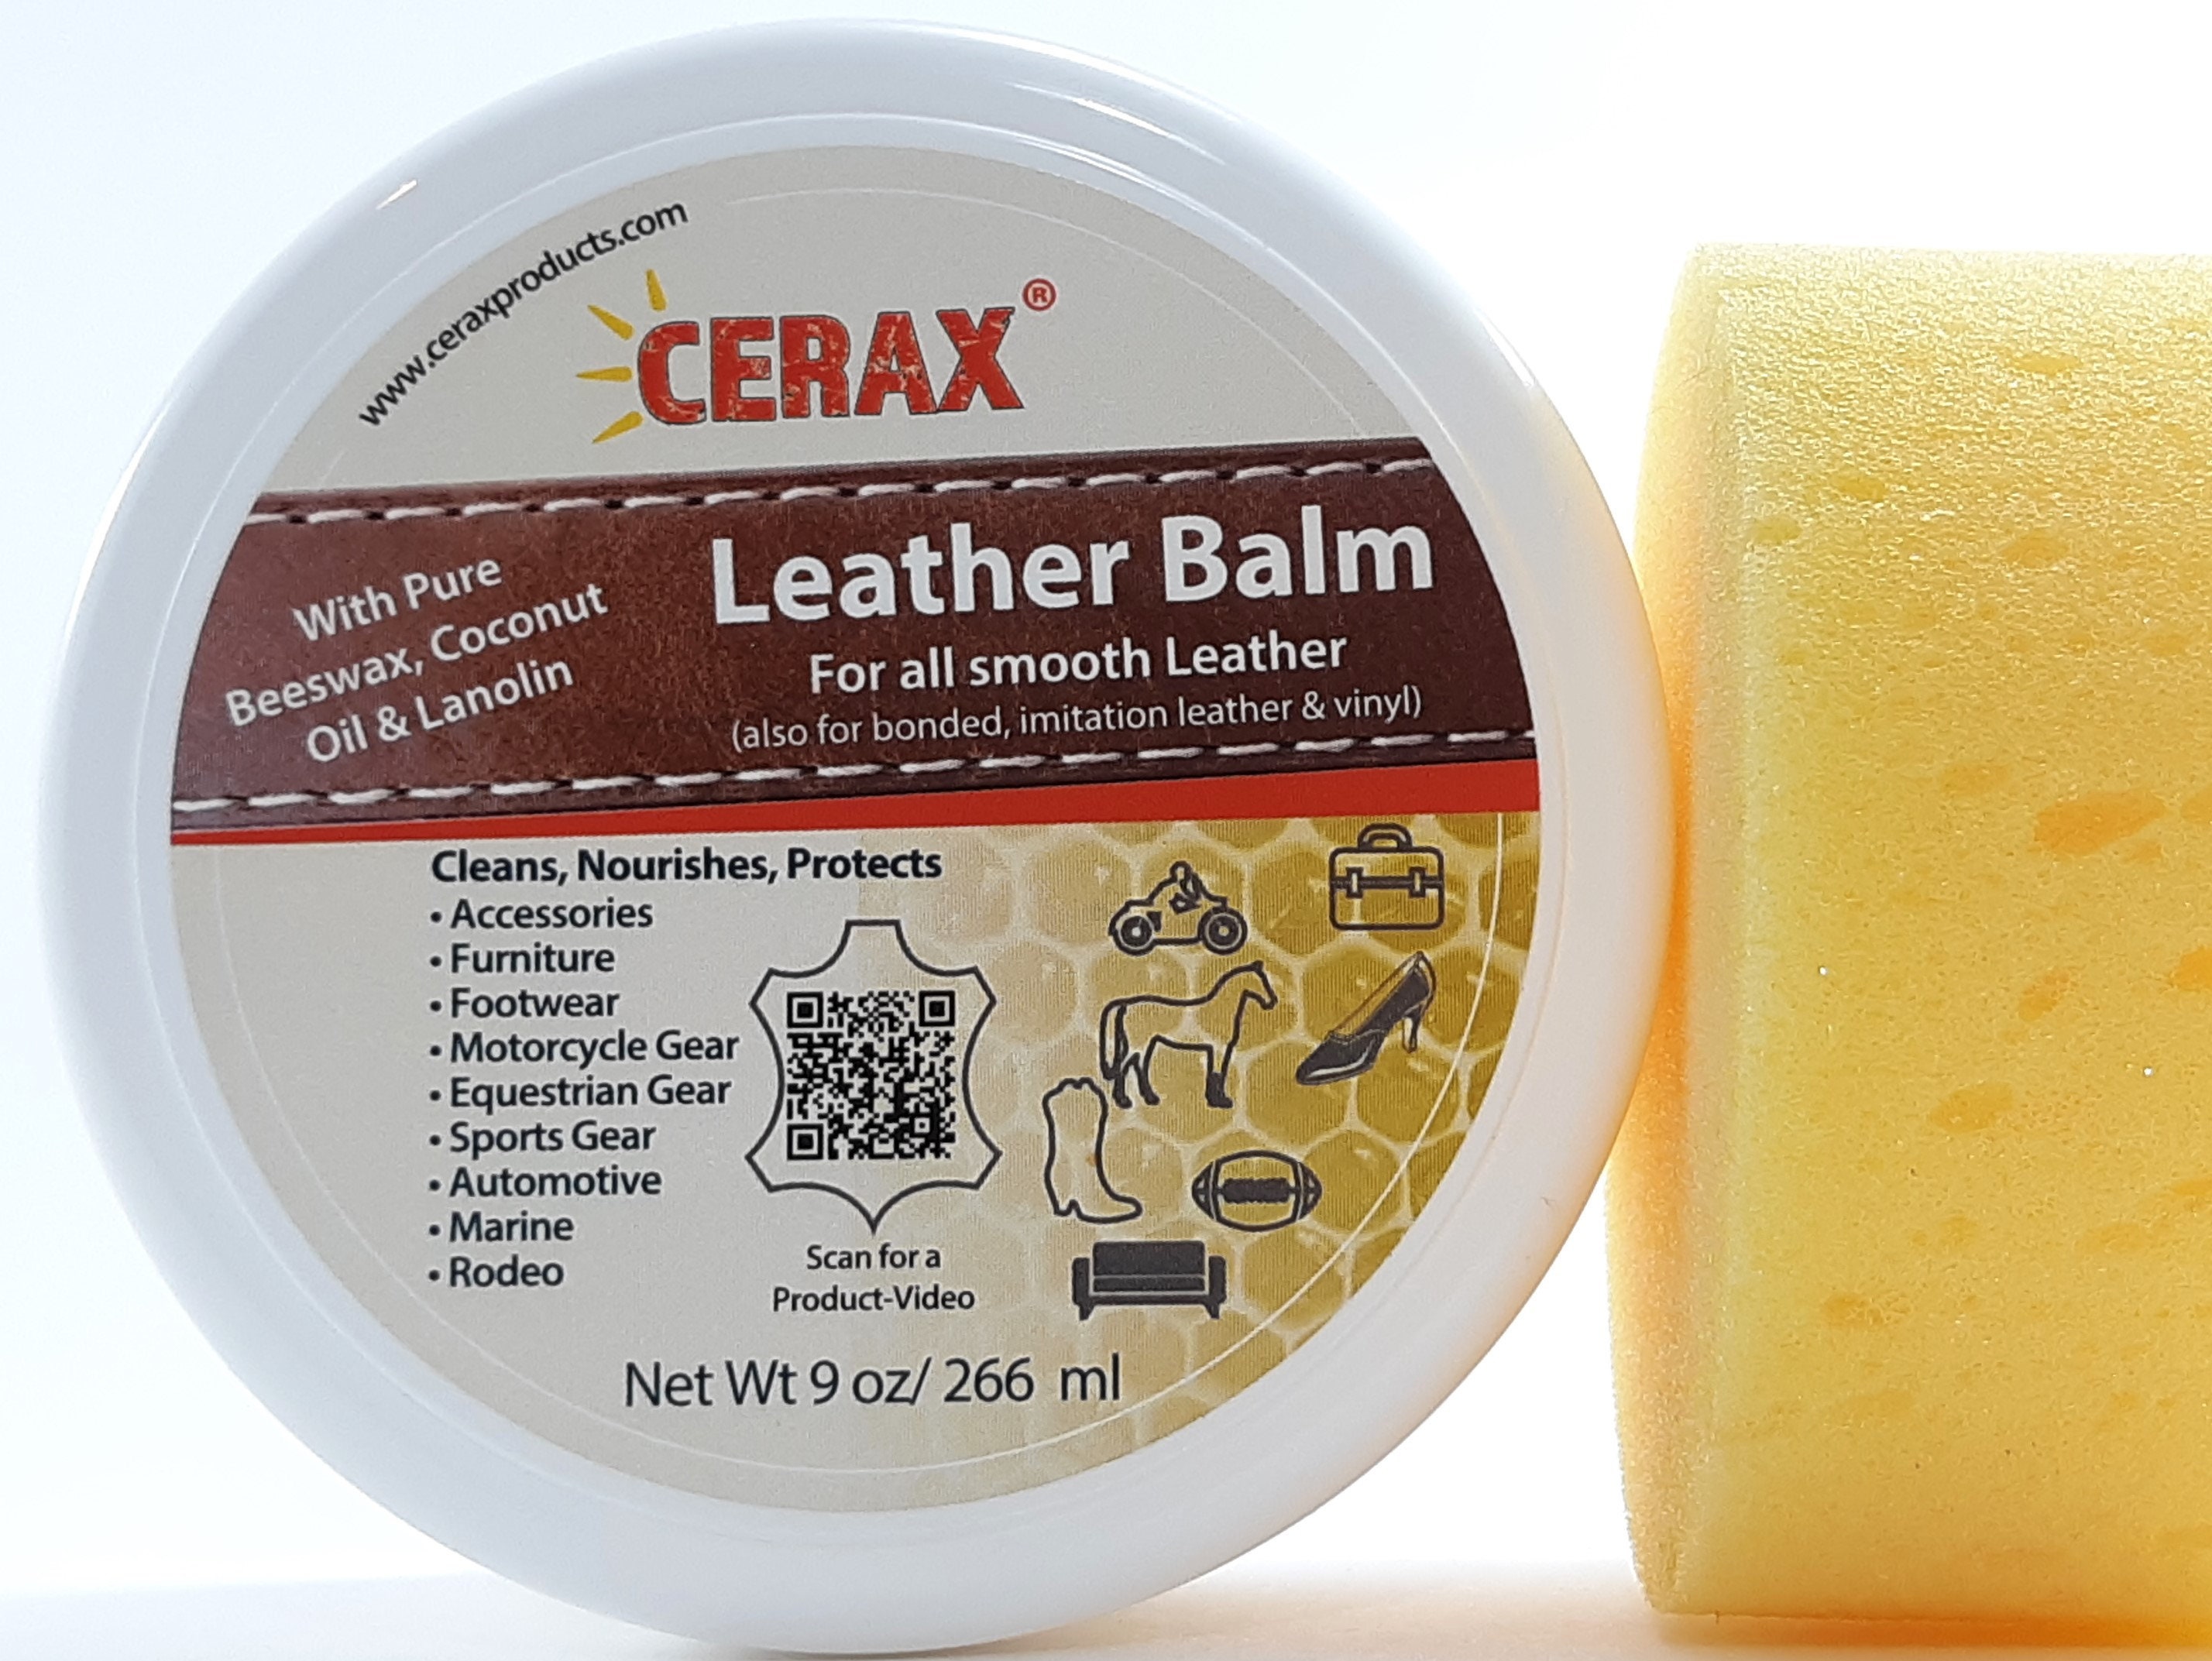 Black Leather Care, Natural Leather Conditioner, Black Leather